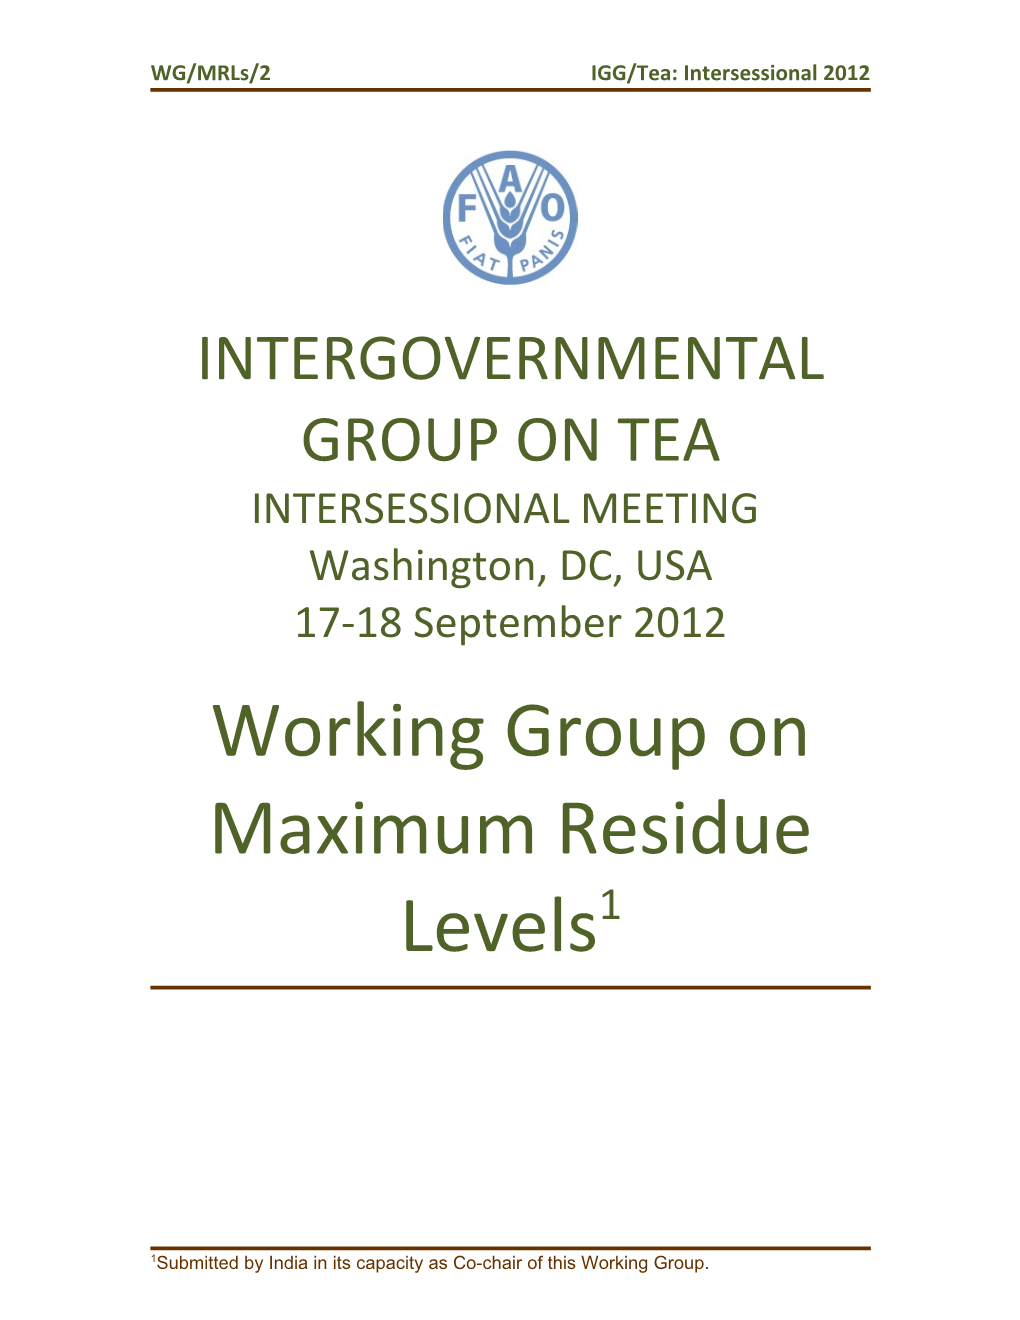 Working Group on Maximum Residue Levels1